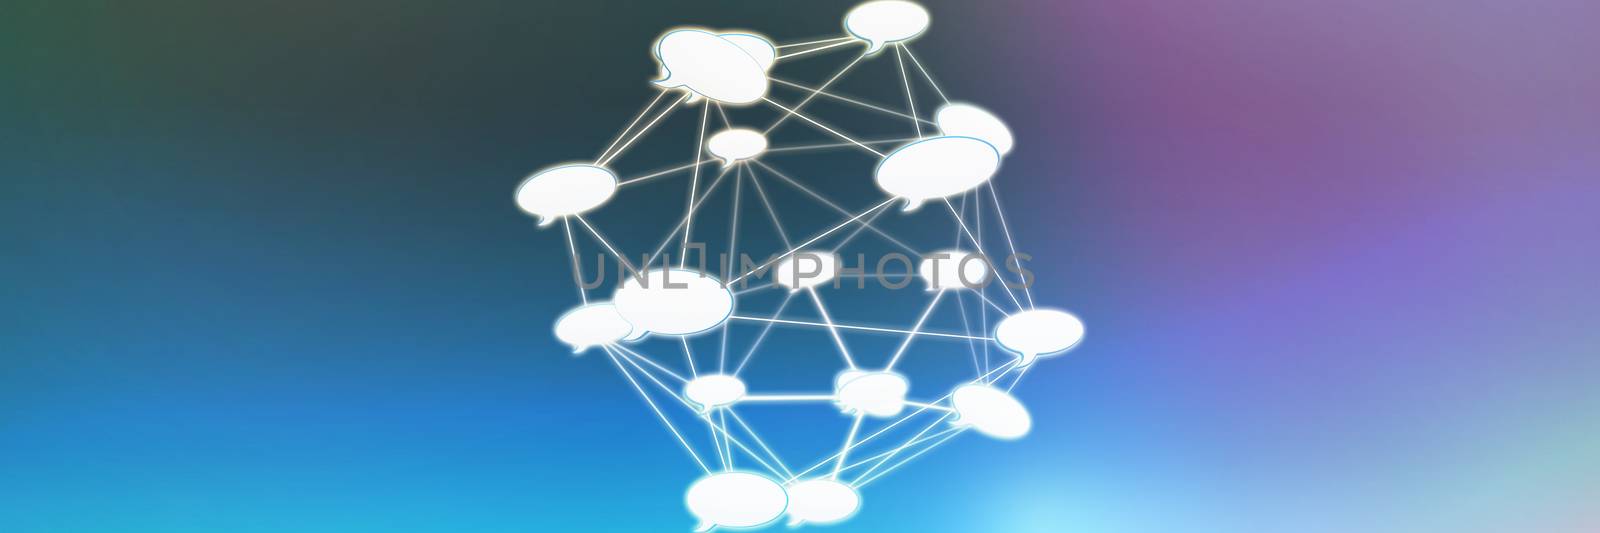 Composite image of abstract image of speech bubble by Wavebreakmedia